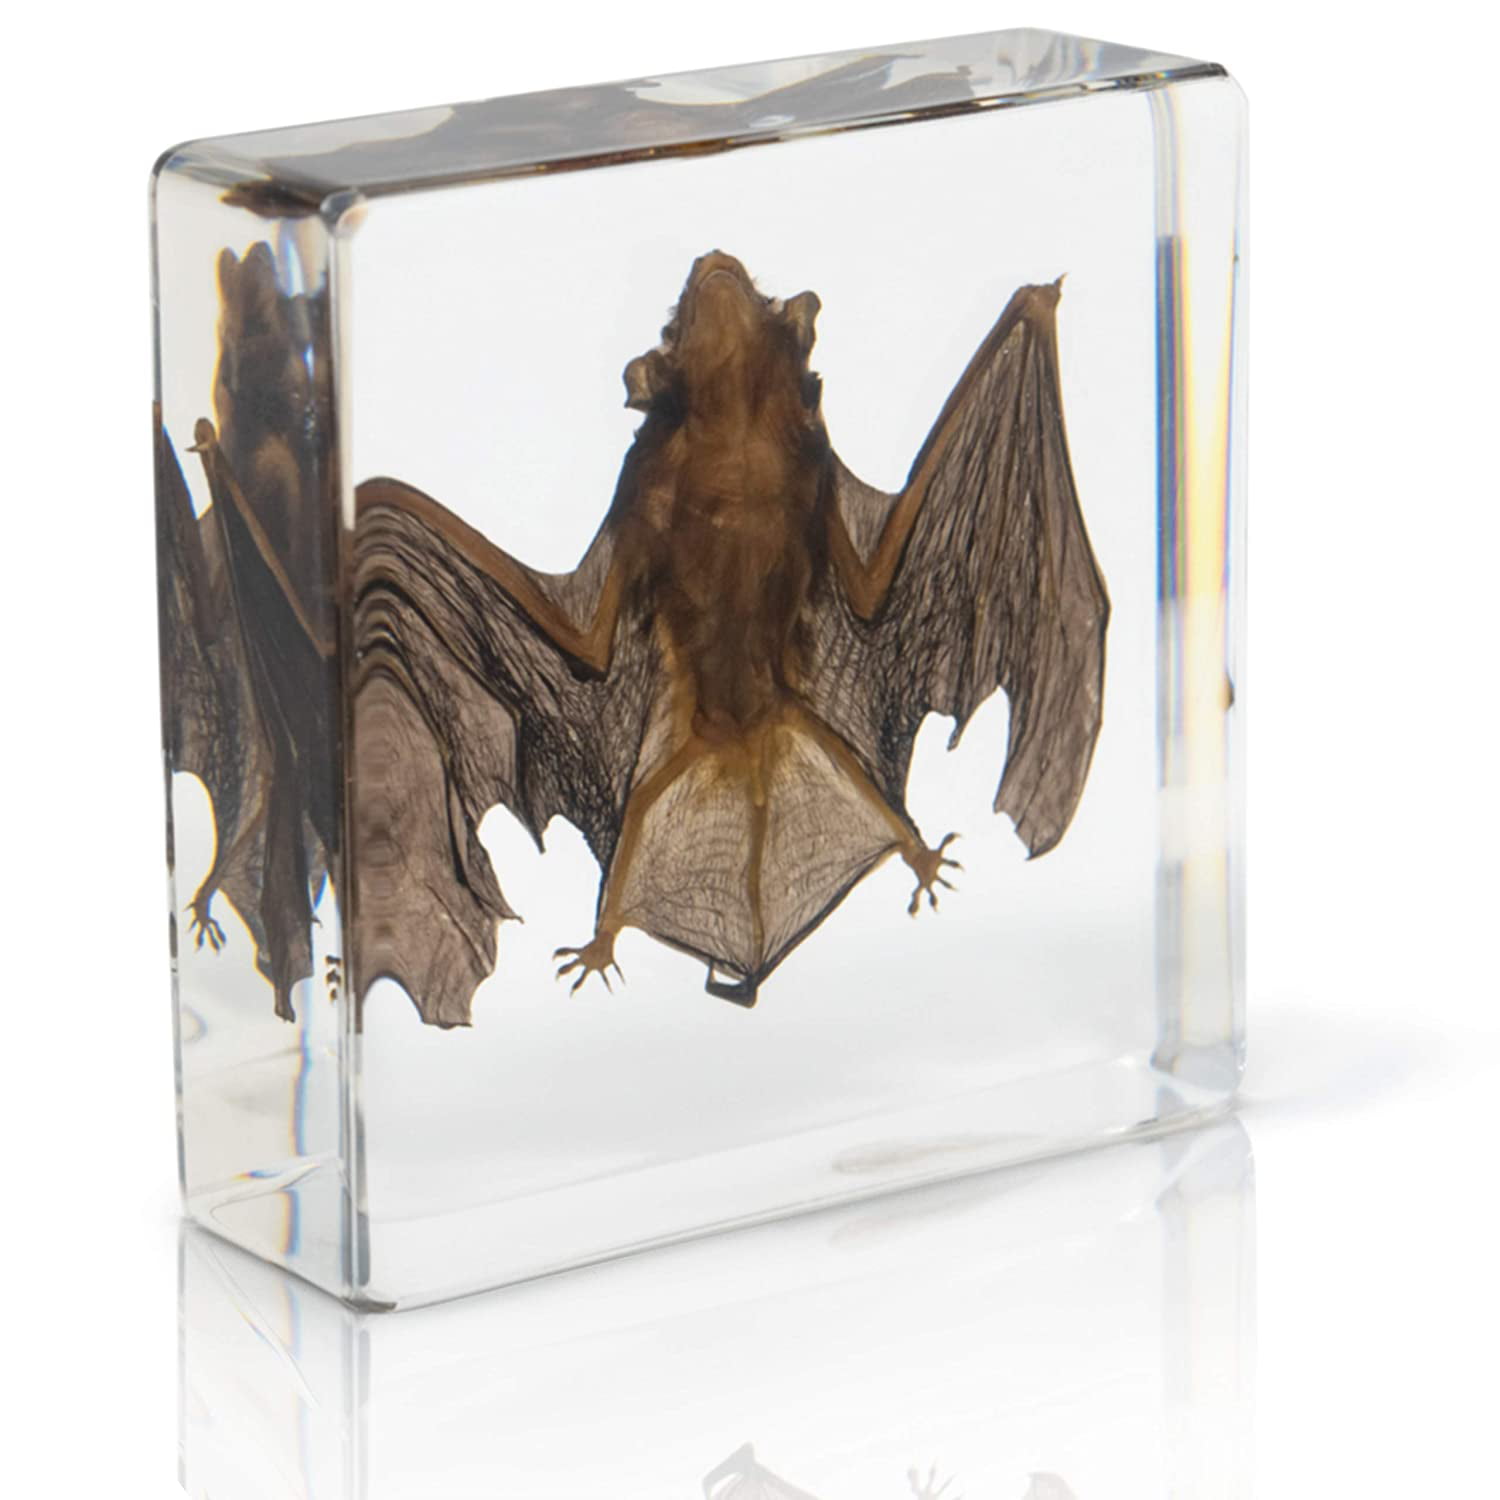 Color : A PRWR Bat Specimens Acrylic Transparent Scientific Teaching Apparatus Bat Amber Animal Insect Educational Teach Supply Biological Collection 95